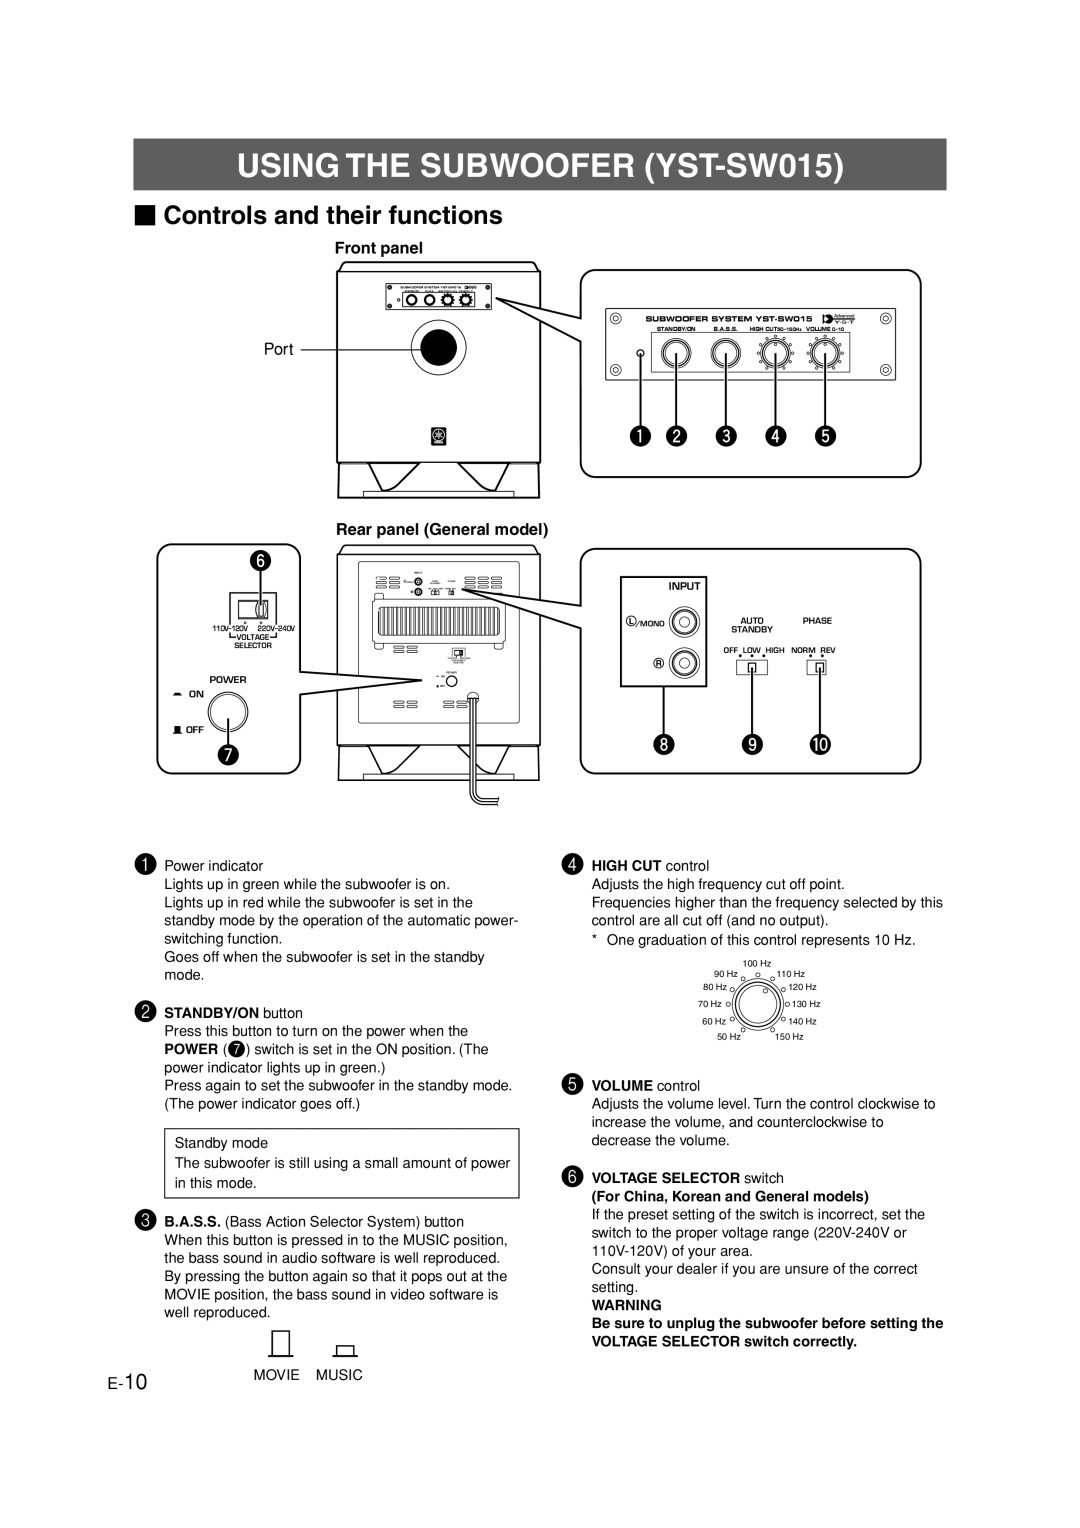 Yamaha HTR-5940 owner manual USING THE SUBWOOFER YST-SW015, Controls and their functions 